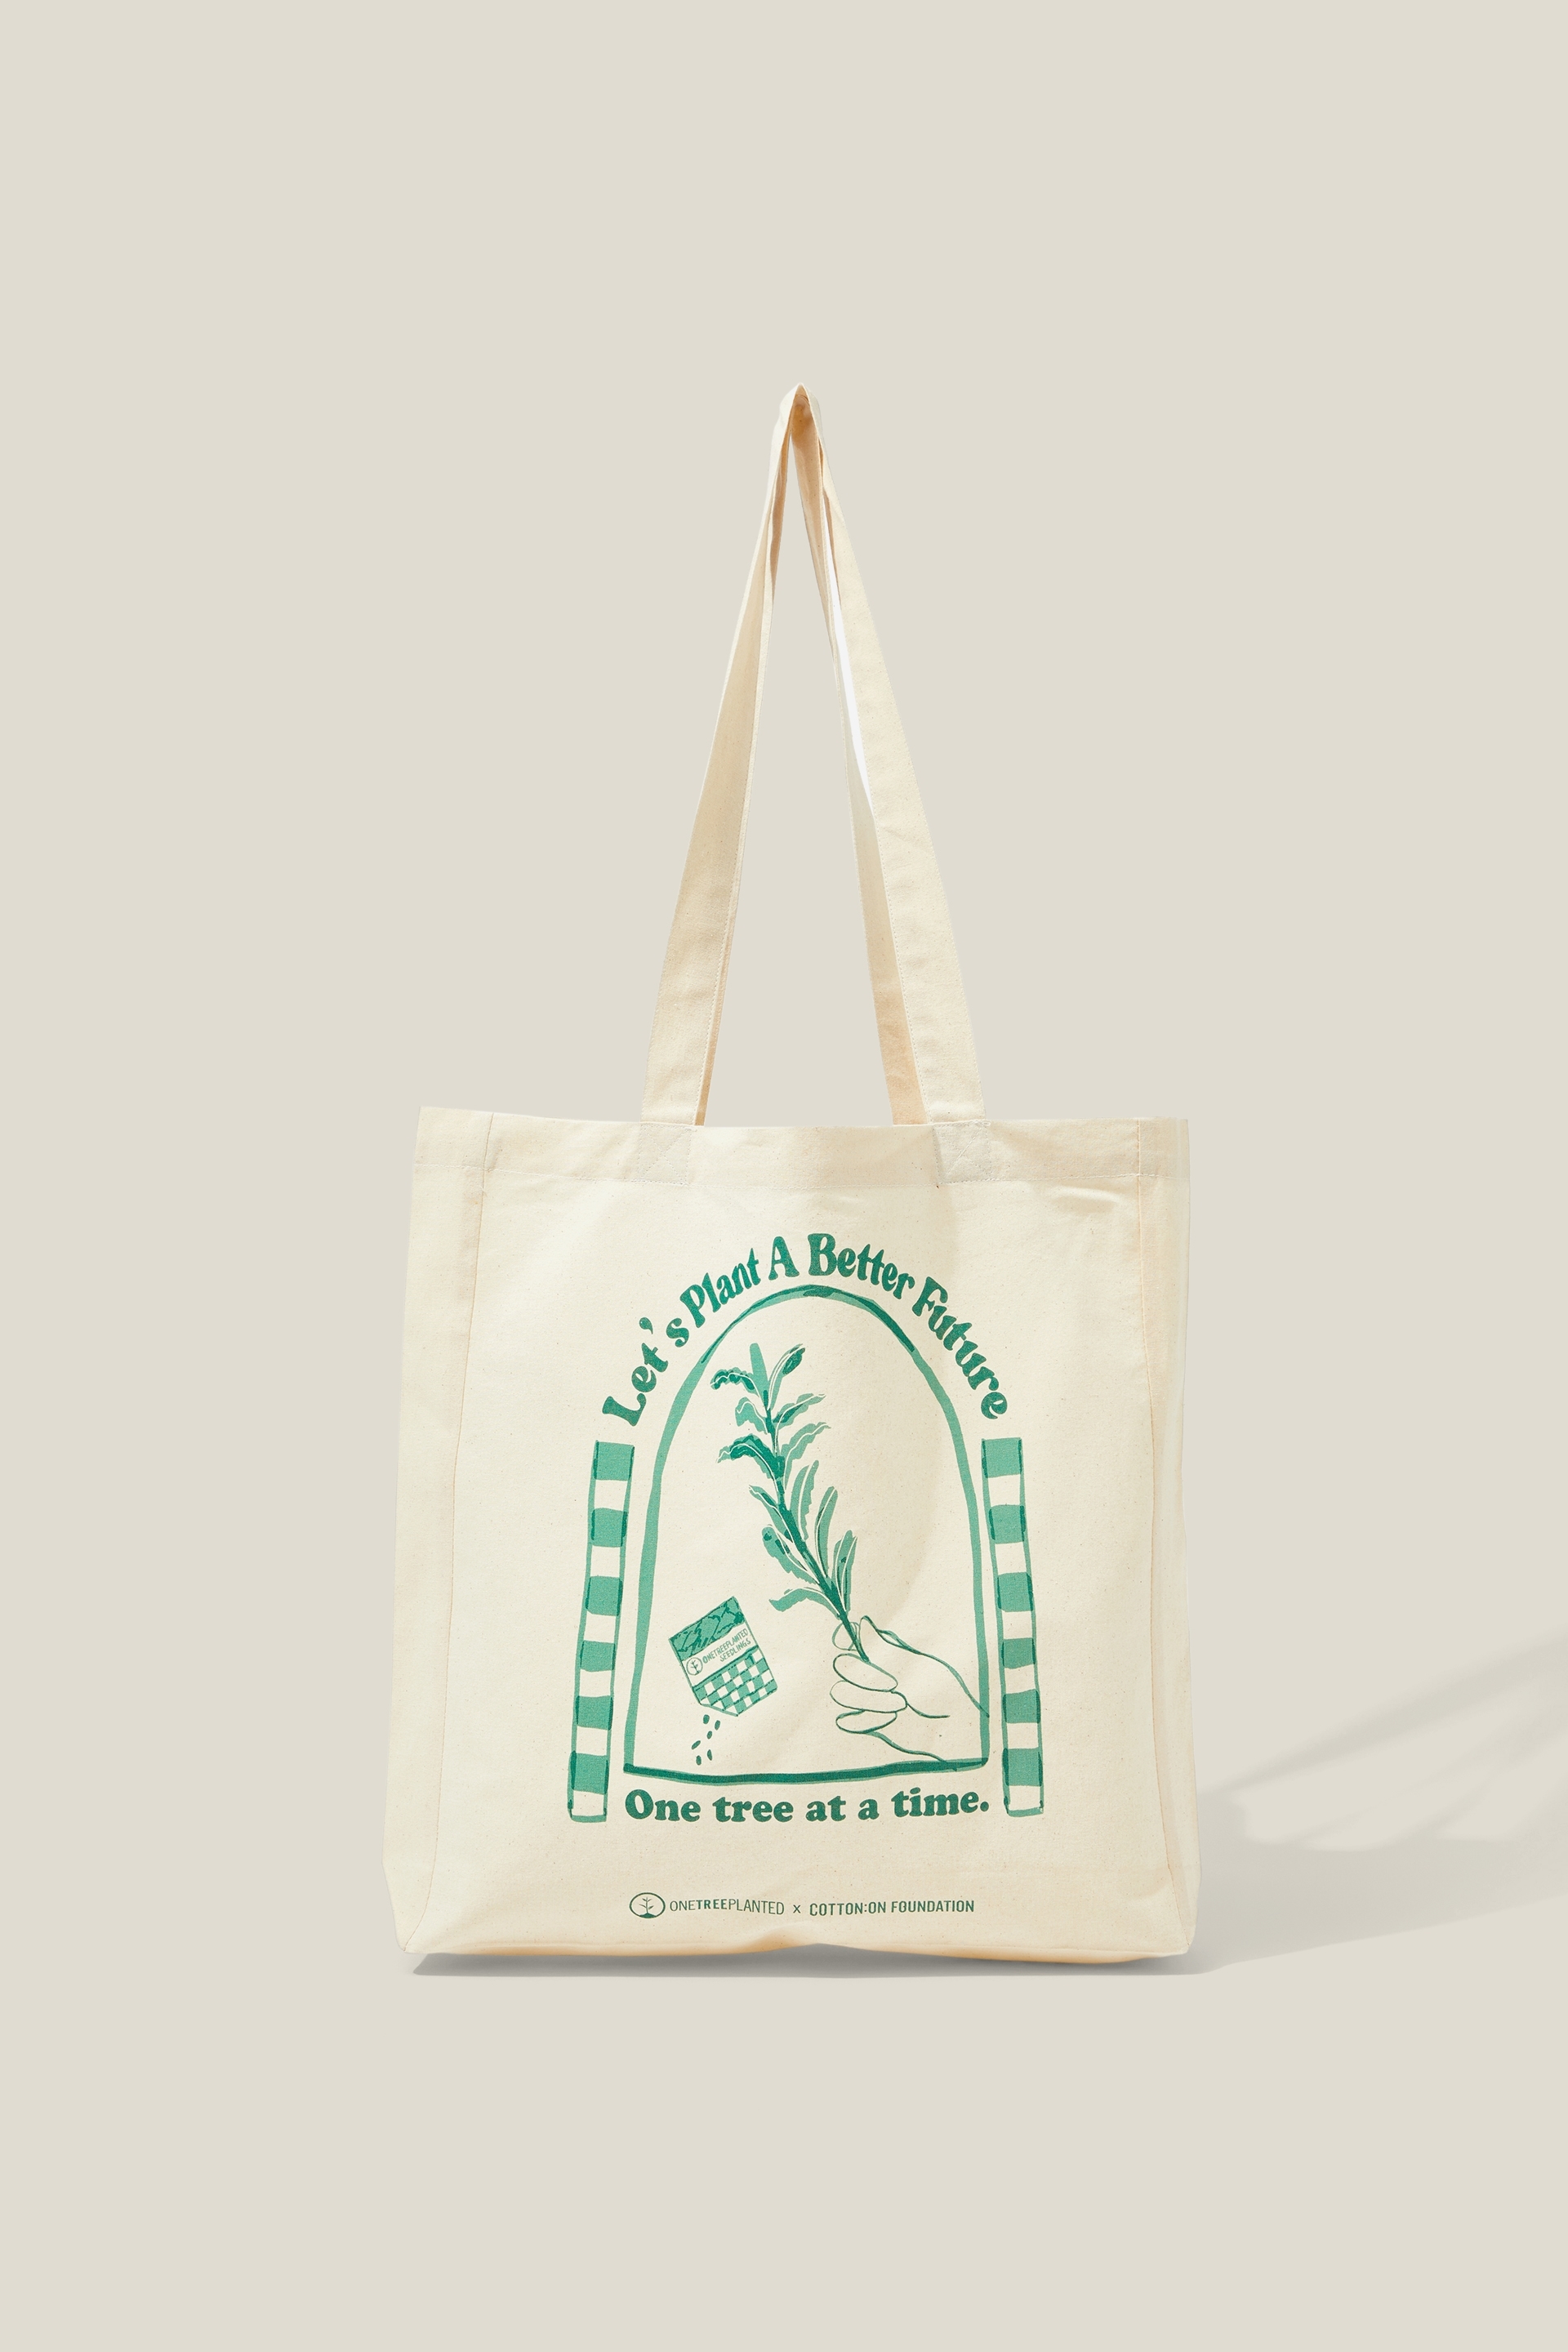 Cotton On Foundation - Foundation Typo Recycled Tote Bag - One tree better future